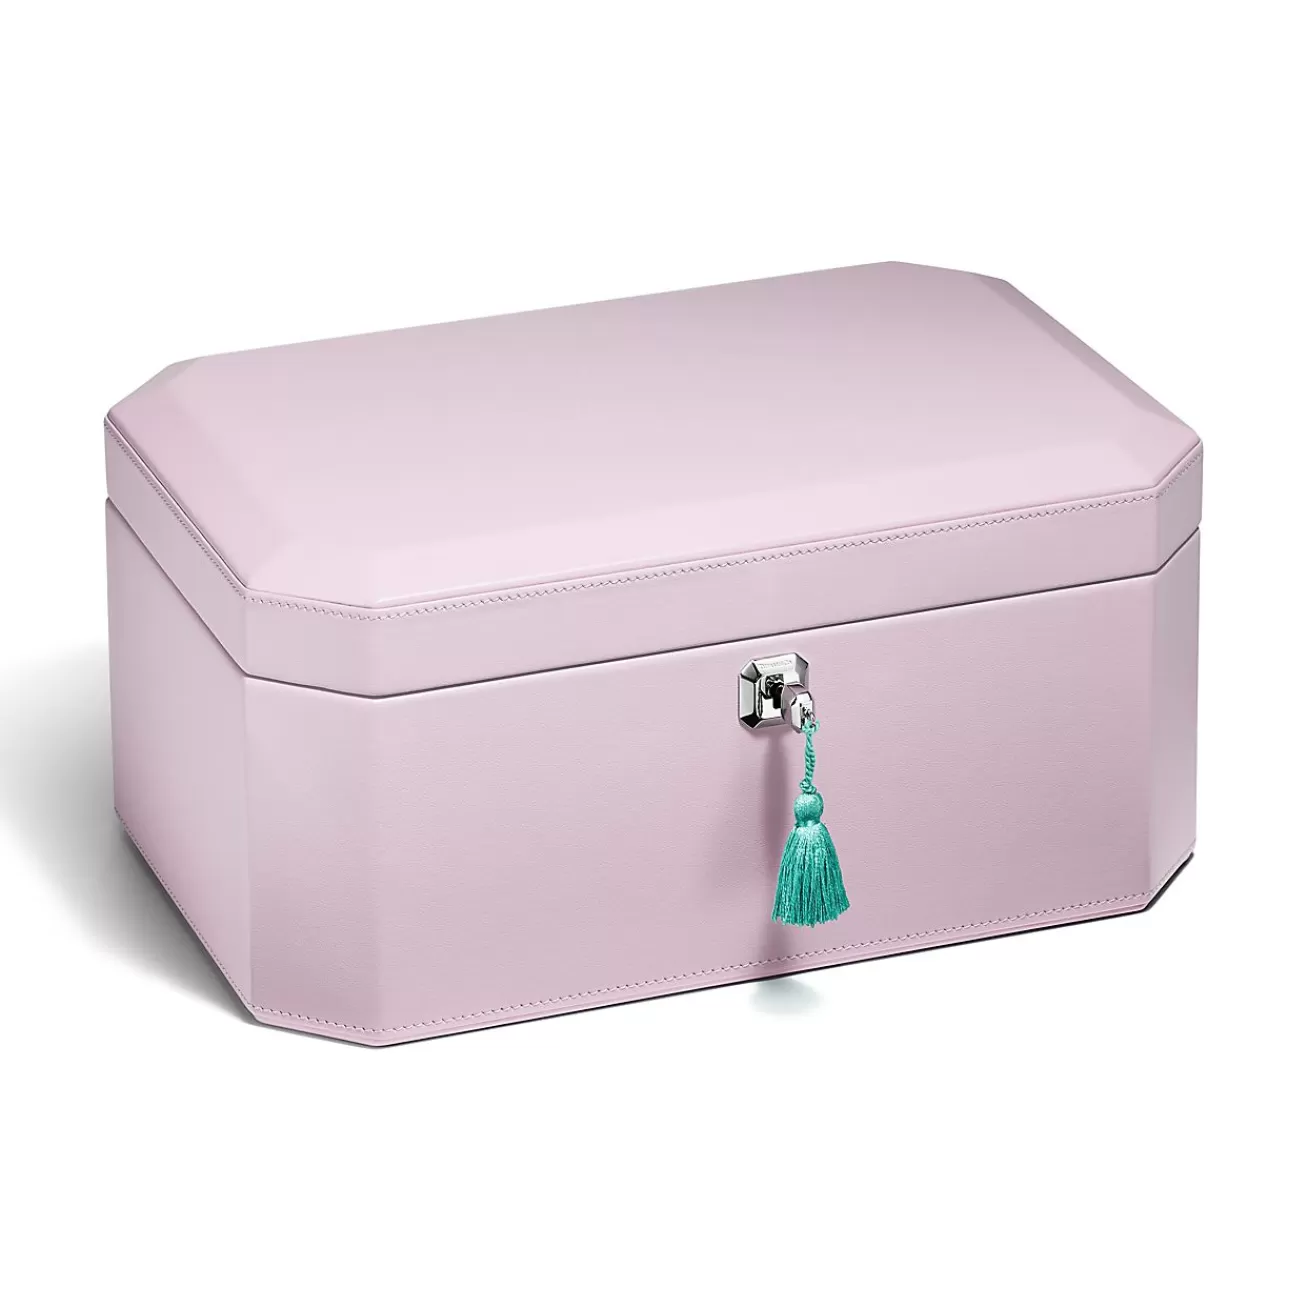 Tiffany & Co. Tiffany Facets Extra Large Jewelry Box in Kunzite-colored Leather | ^ Decor